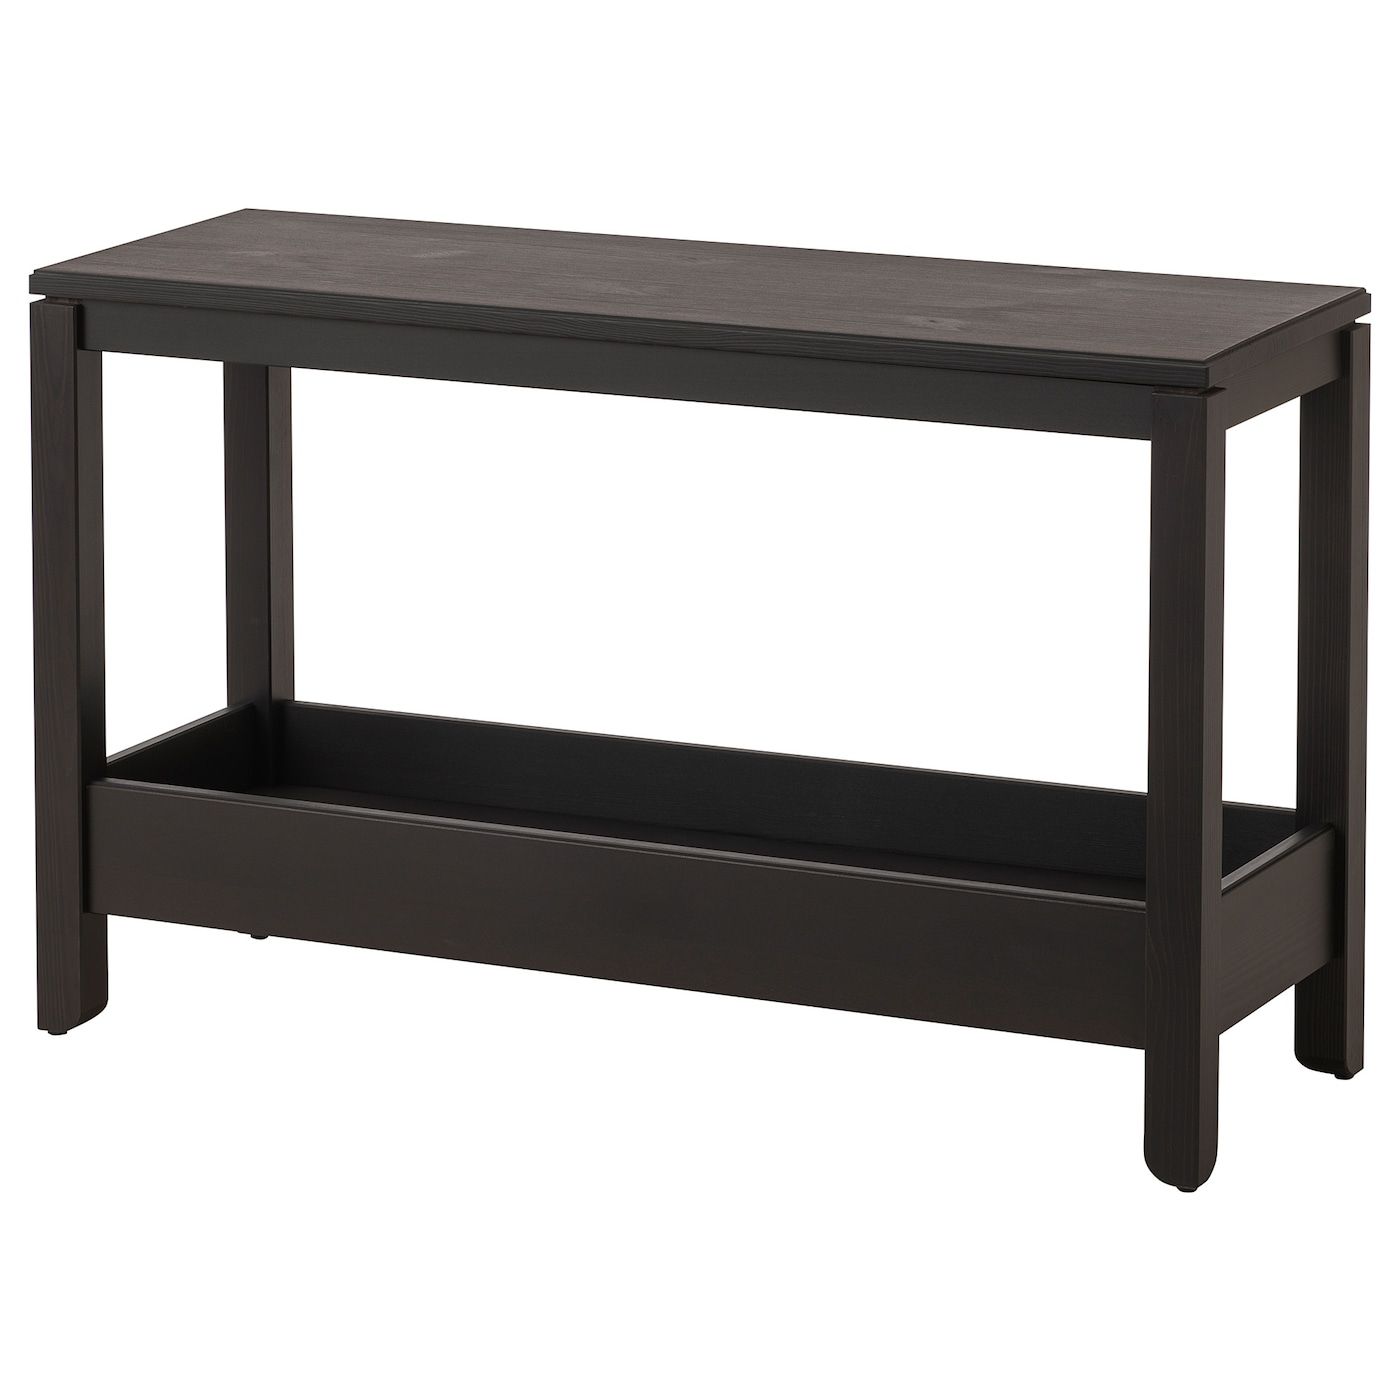 Havsta Console Table – Dark Brown – Ikea With Regard To Dark Brown Console Tables (Gallery 19 of 20)